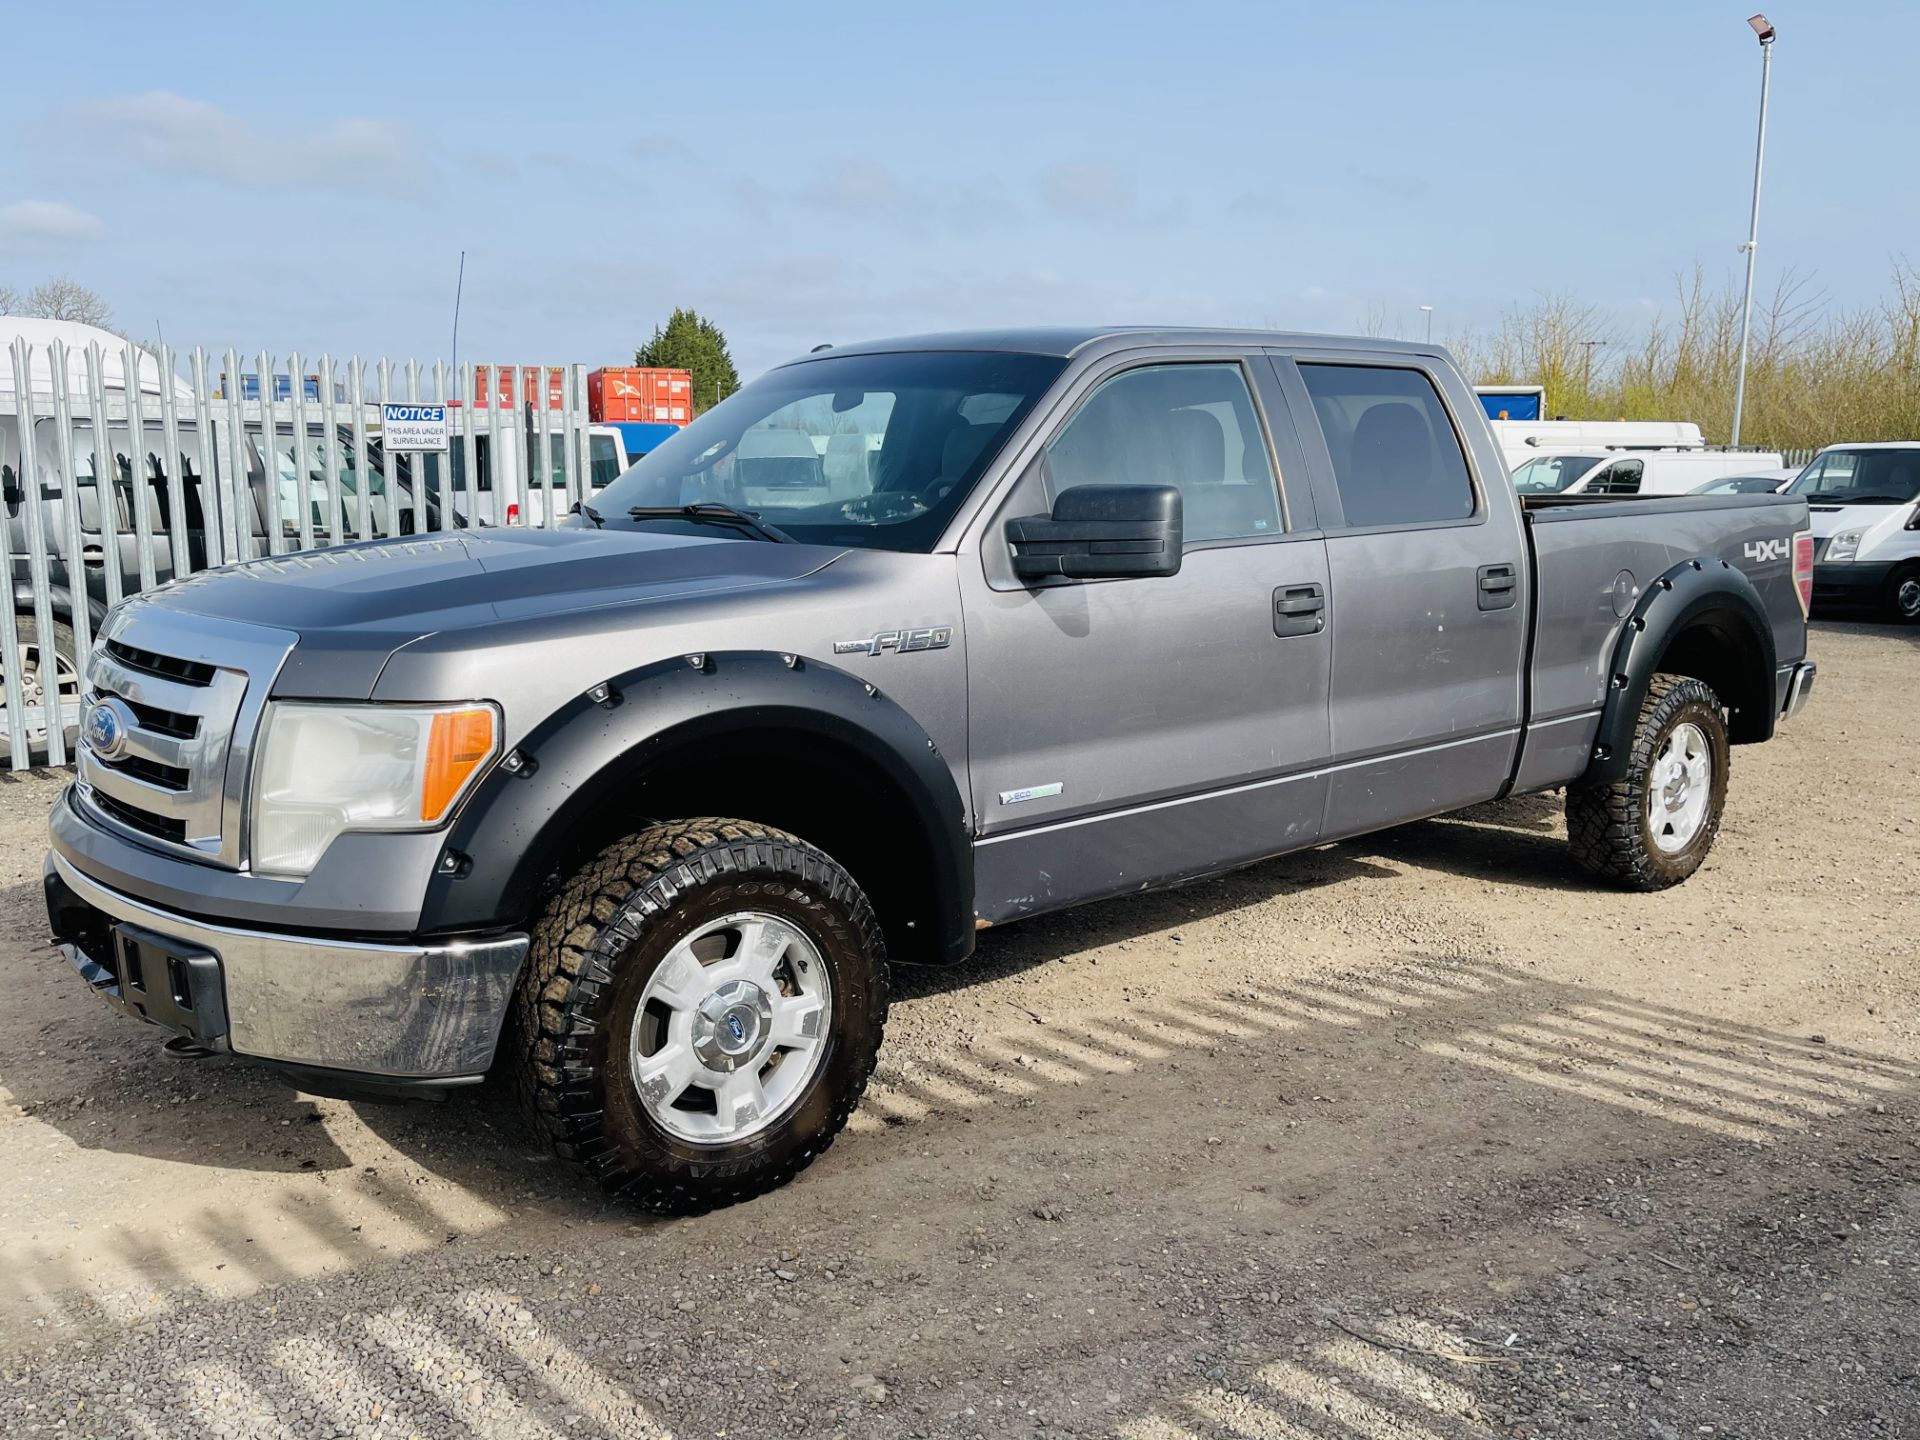 Ford F-150 XLT Edition 3.5L V6 Eco-boost Super-Crew 4x4 - '2012 Year' - Air Con - No Vat save 20% - Image 5 of 25